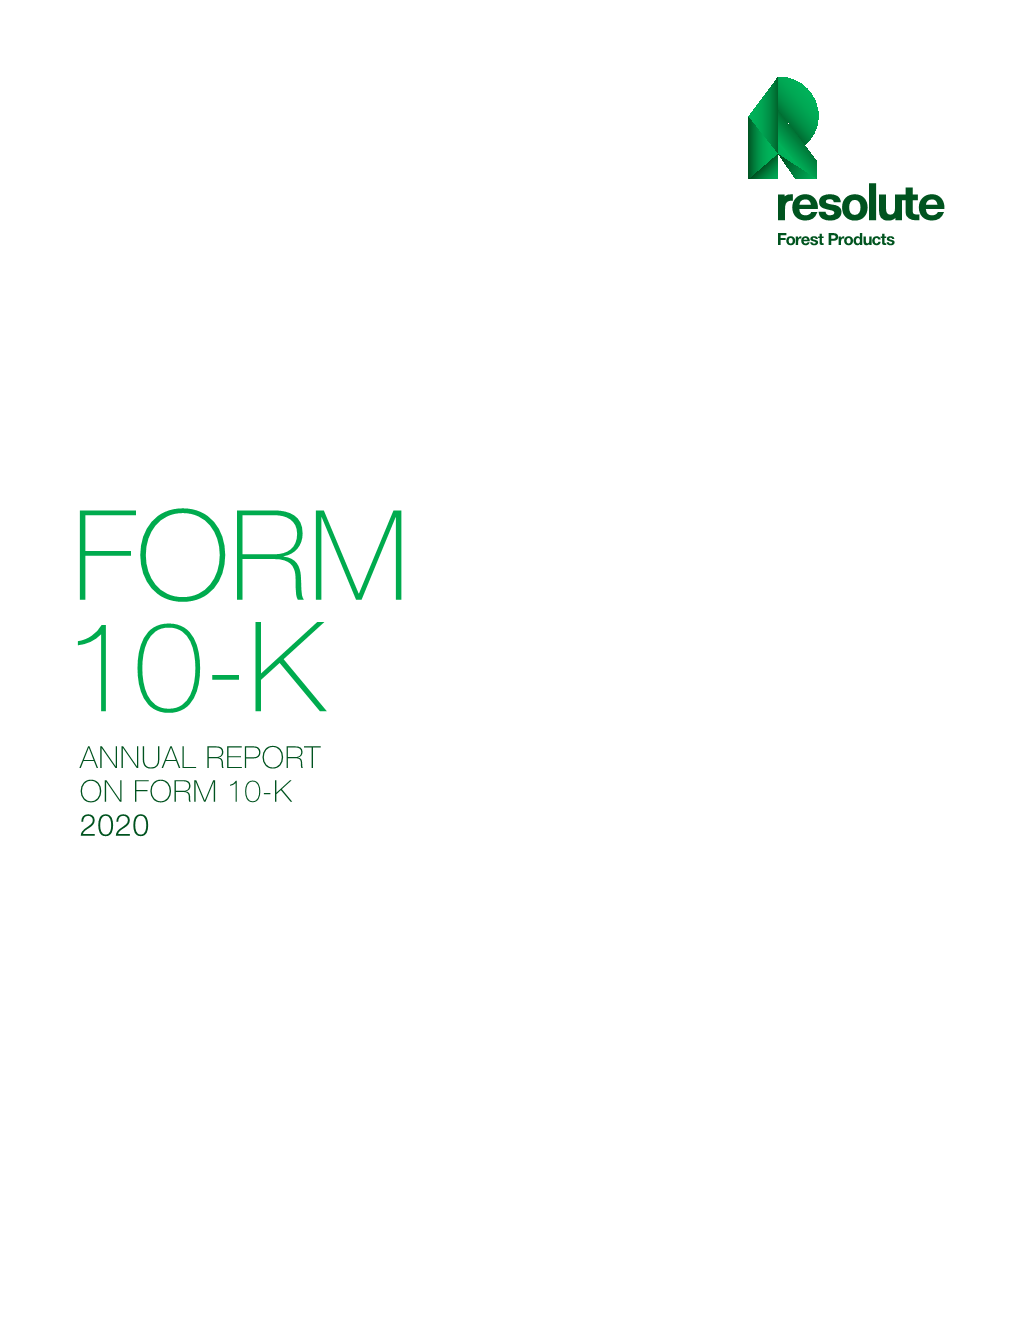 Annual Report on Form 10-K 2020